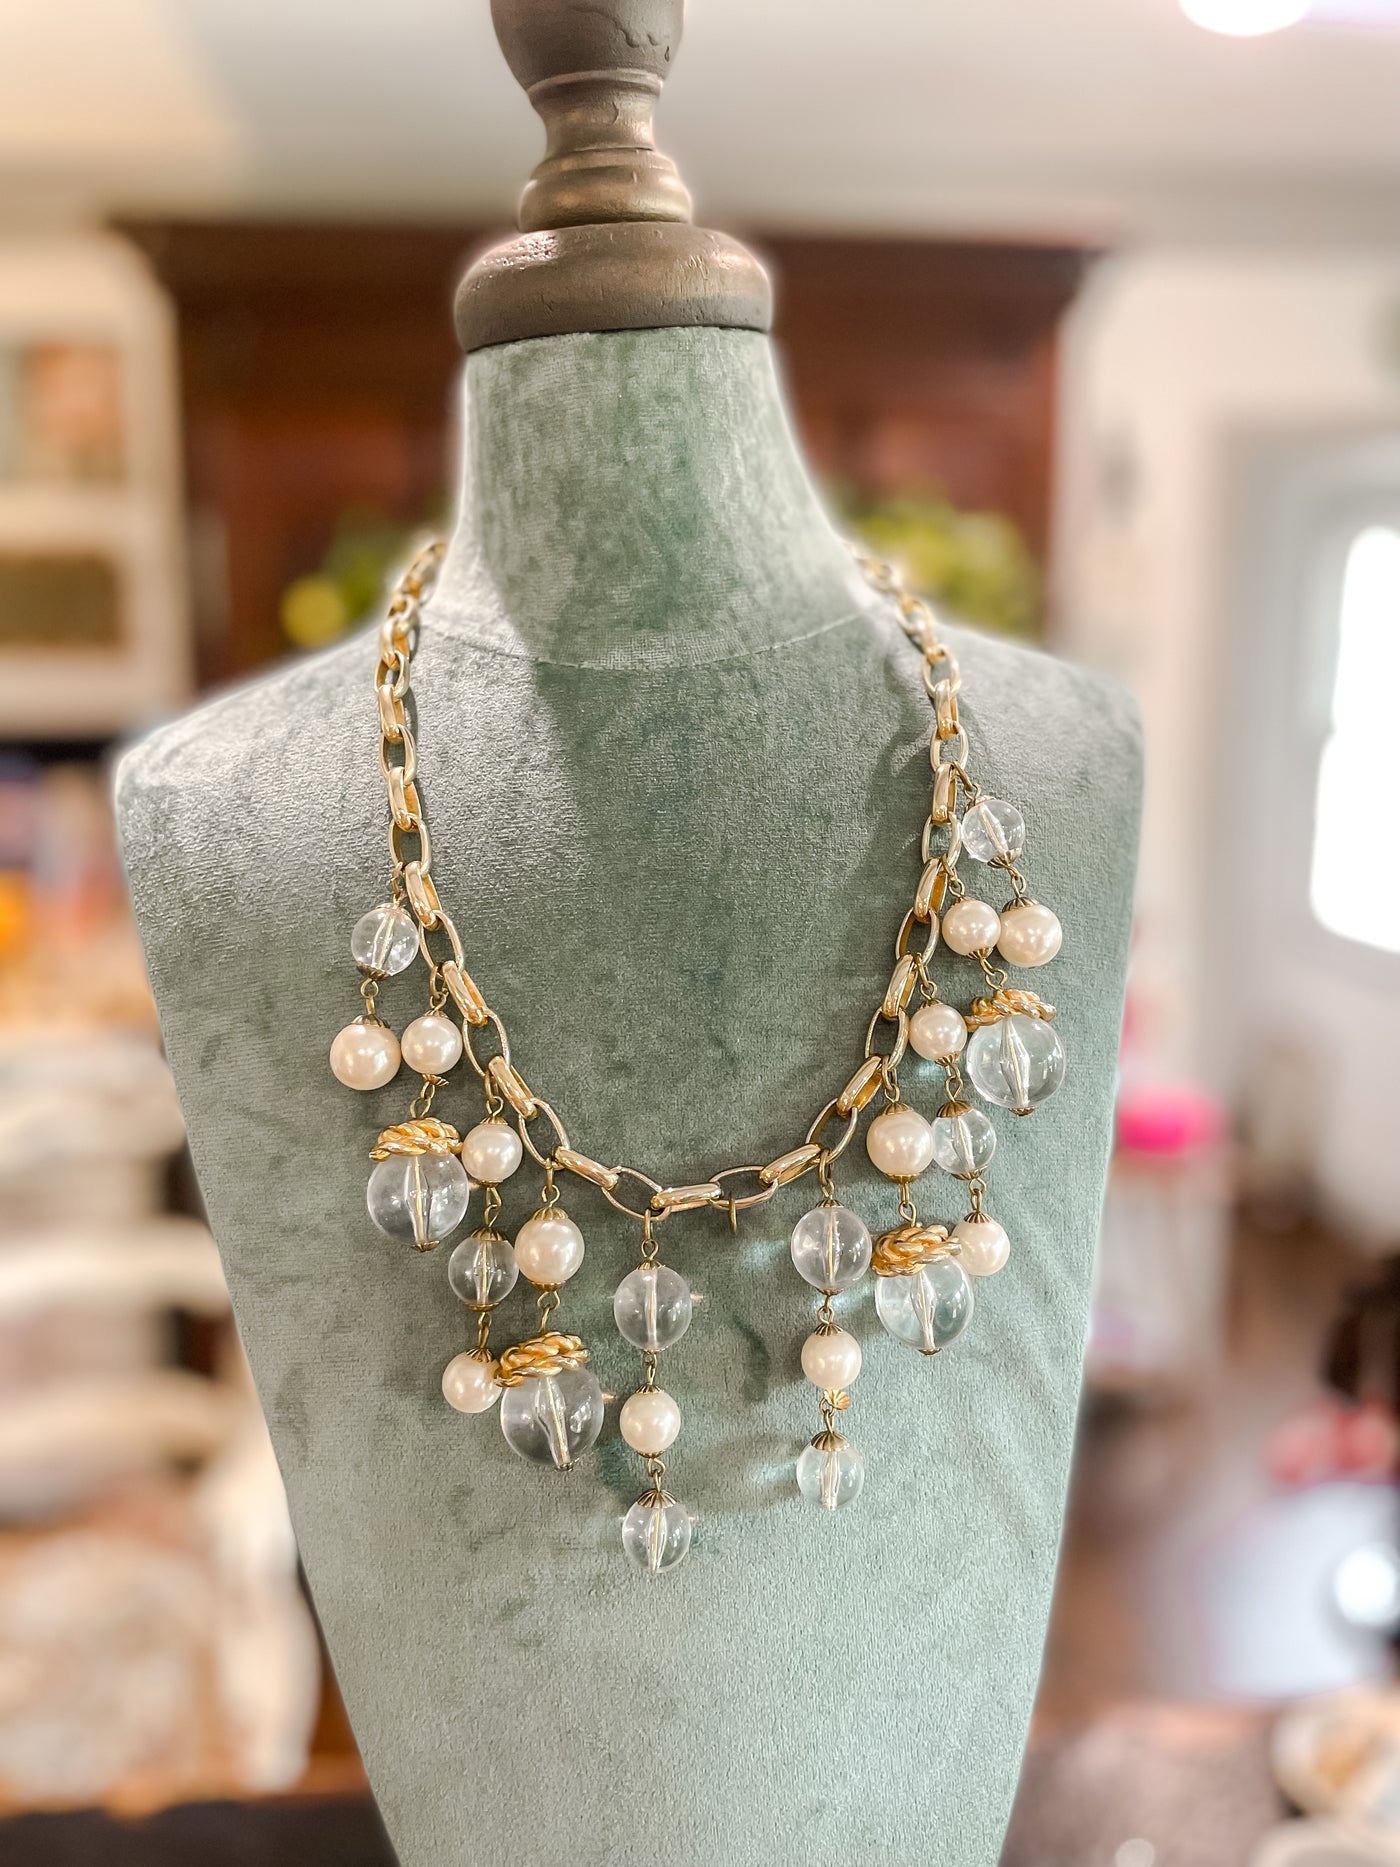 Vintage Necklace with Pearls and Lucite Drops